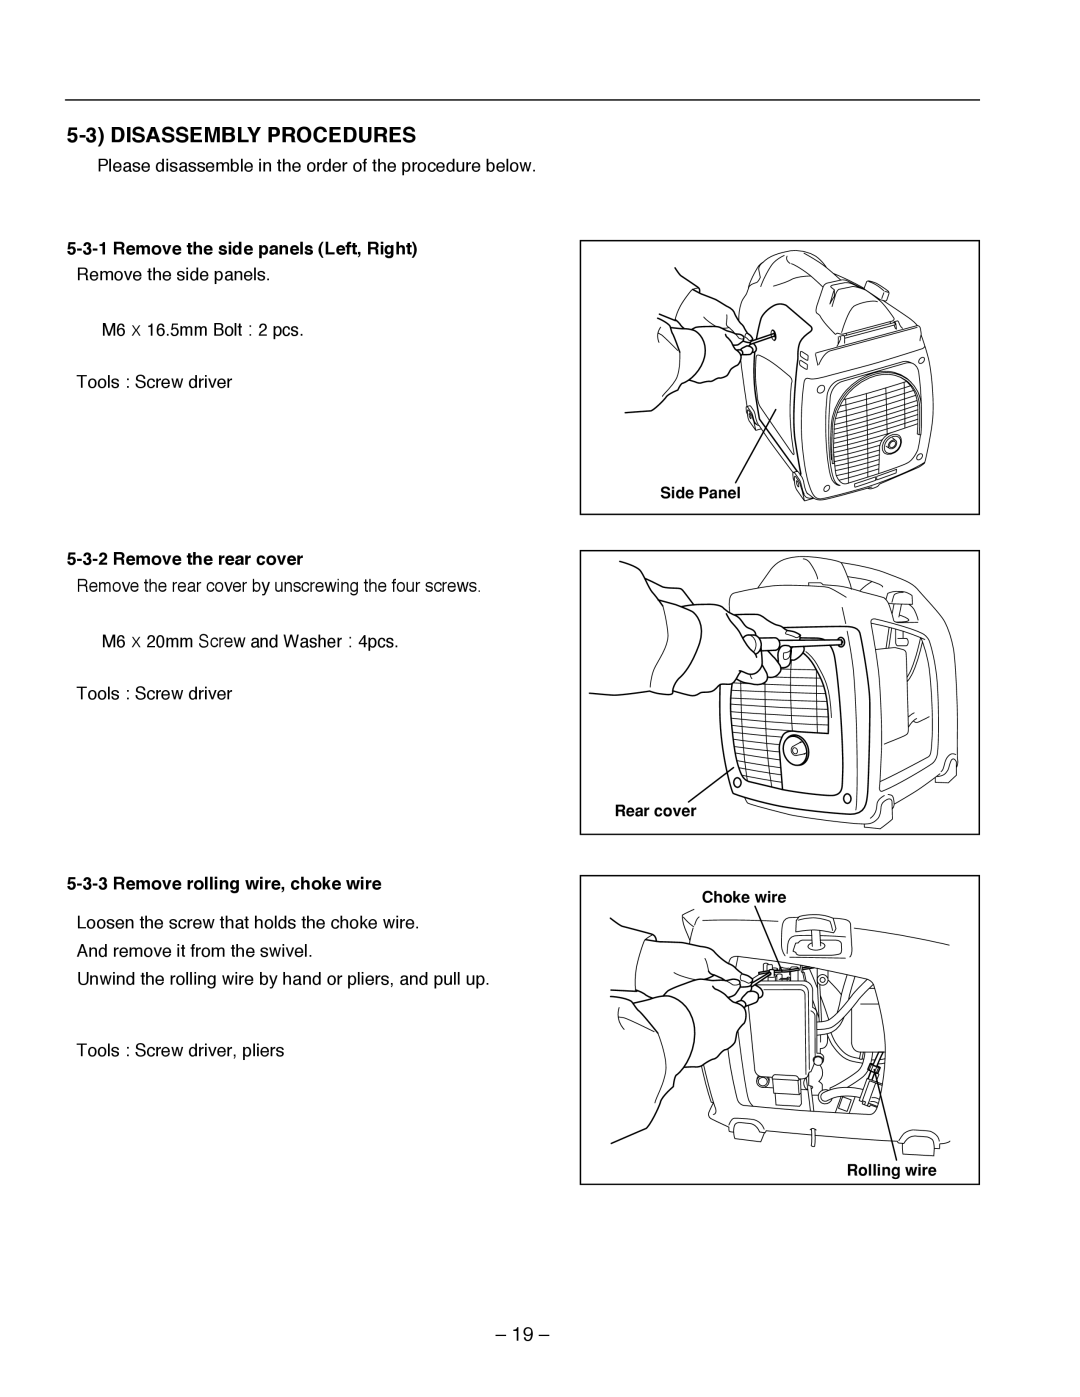 Subaru Robin Power Products R1700i service manual 5-3DISASSEMBLY PROCEDURES, 19, 5-3-1Remove the side panels Left, Right 